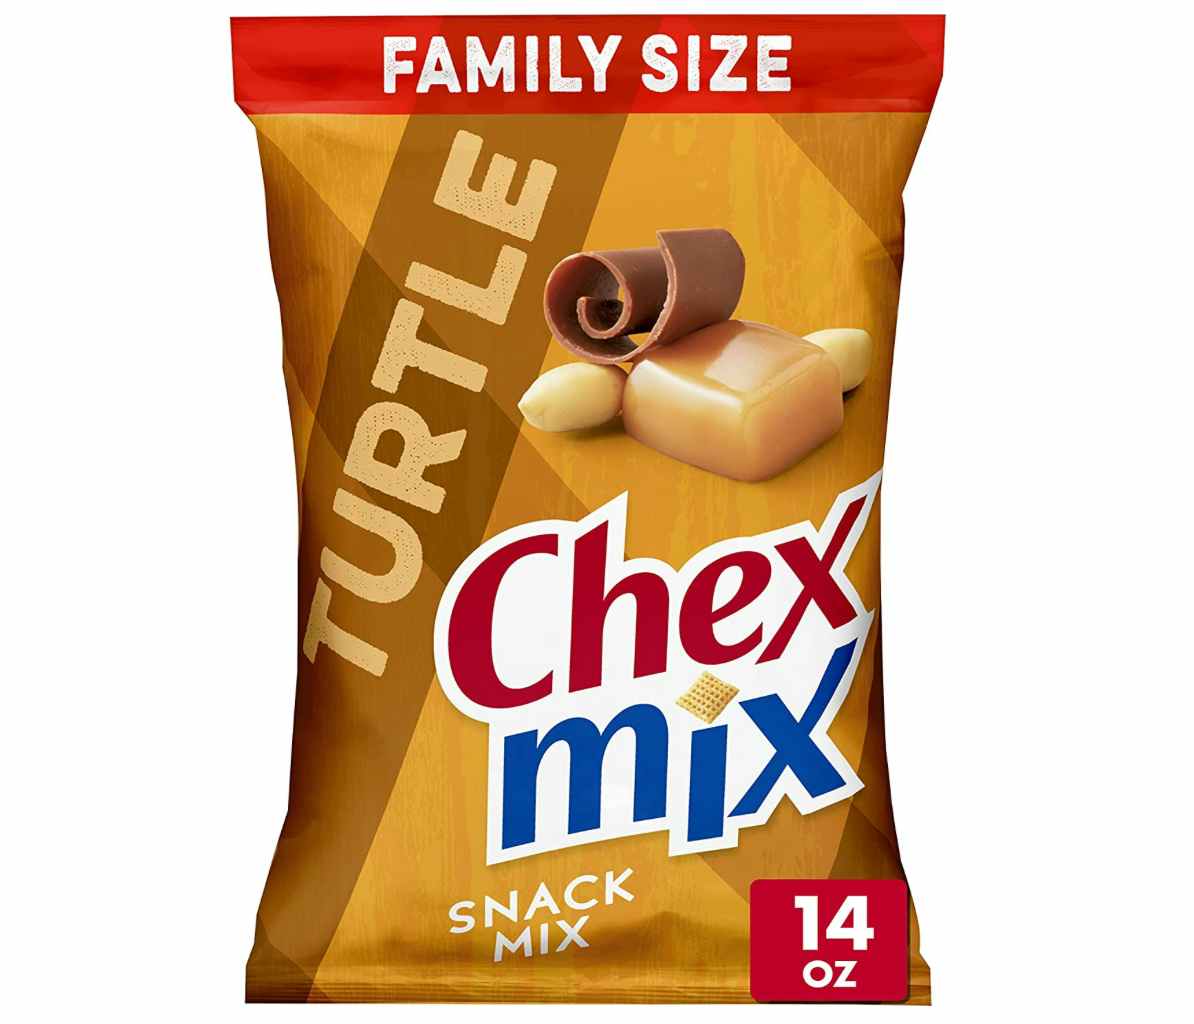 Chex Mix Snack Mix bag on a white background